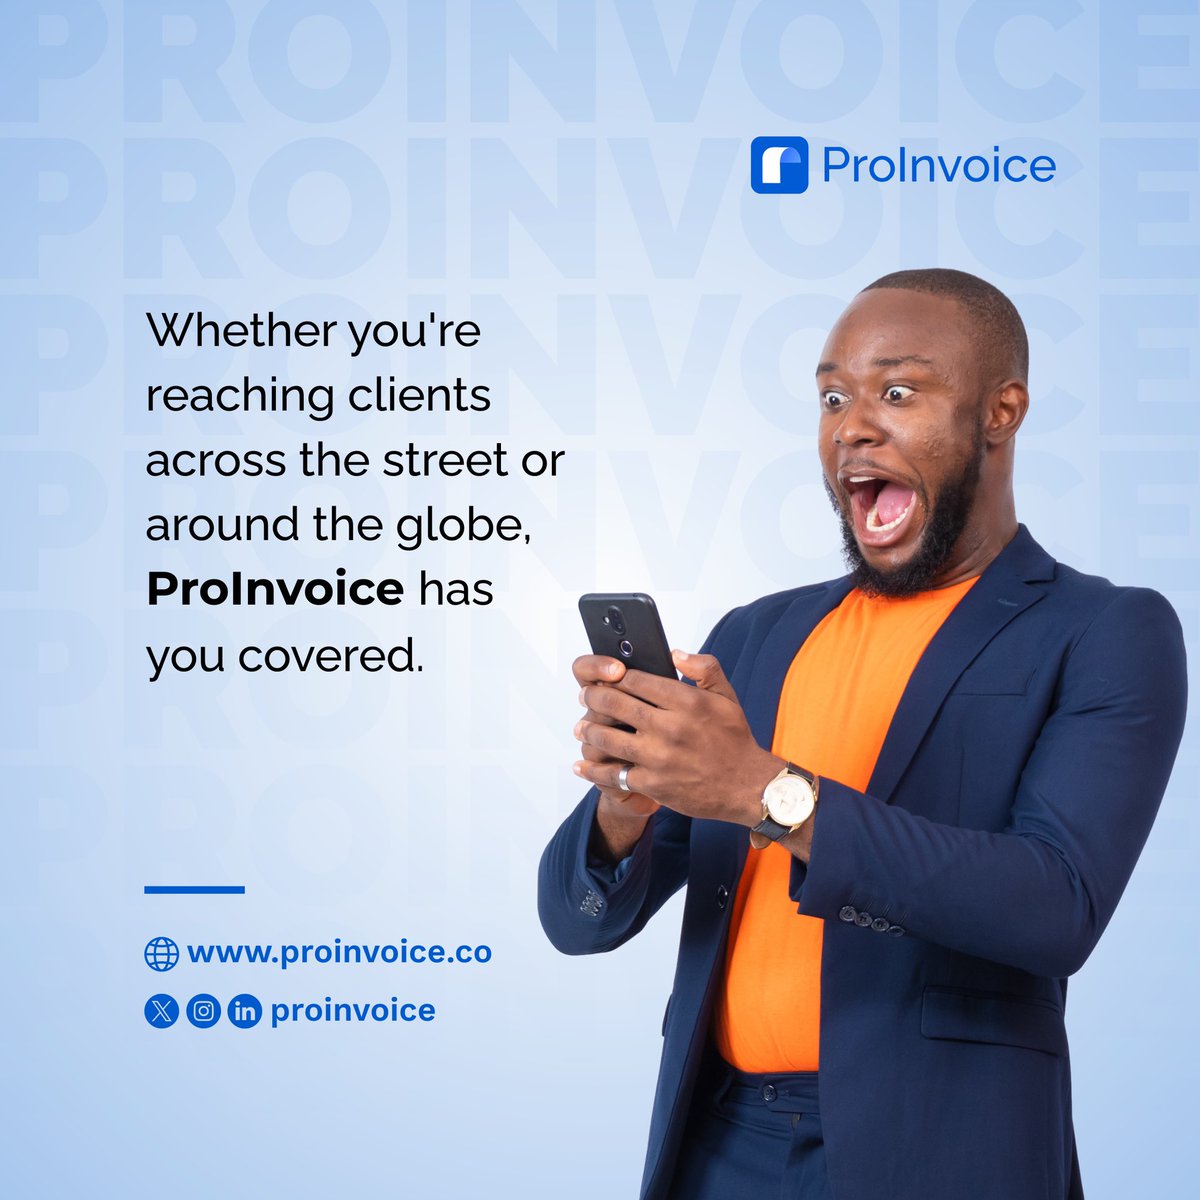 ProInvoice software supports multiple currencies, allowing you to invoice and track payments in different currencies with ease. 

Expand your business globally and streamline your invoicing process with ProInvoice's multiple currency feature.

#proinvoice
#growwithproinvoice